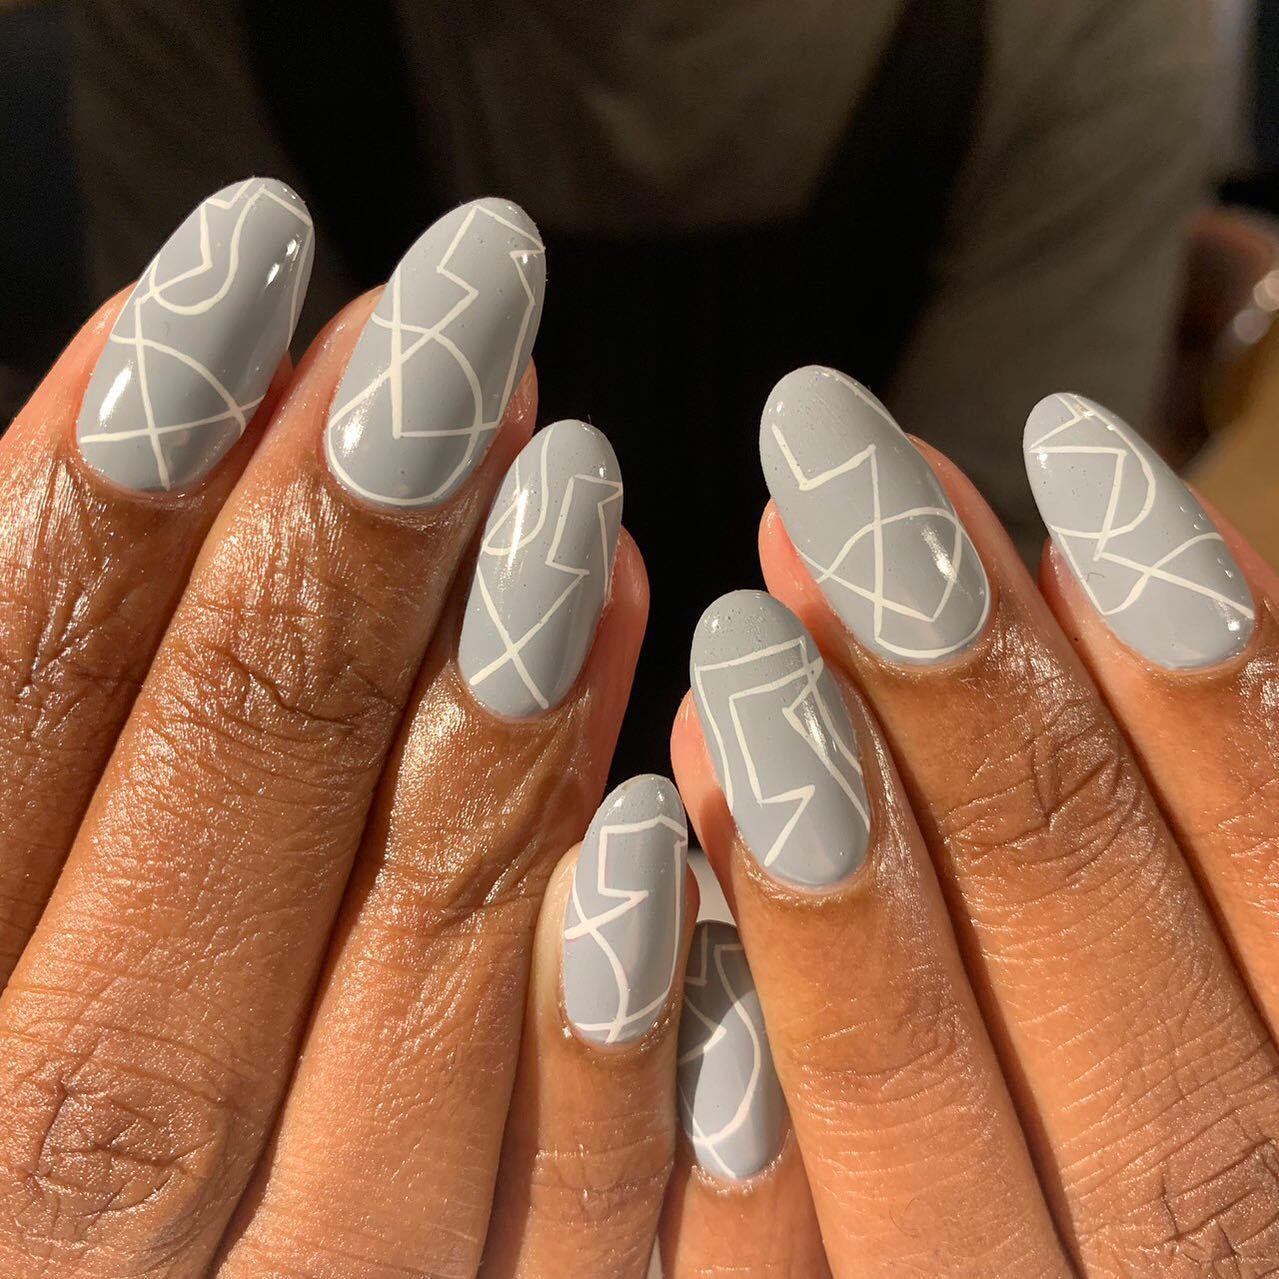 Met Gala 2023: Celebrity Nail Art and Nail Ideas